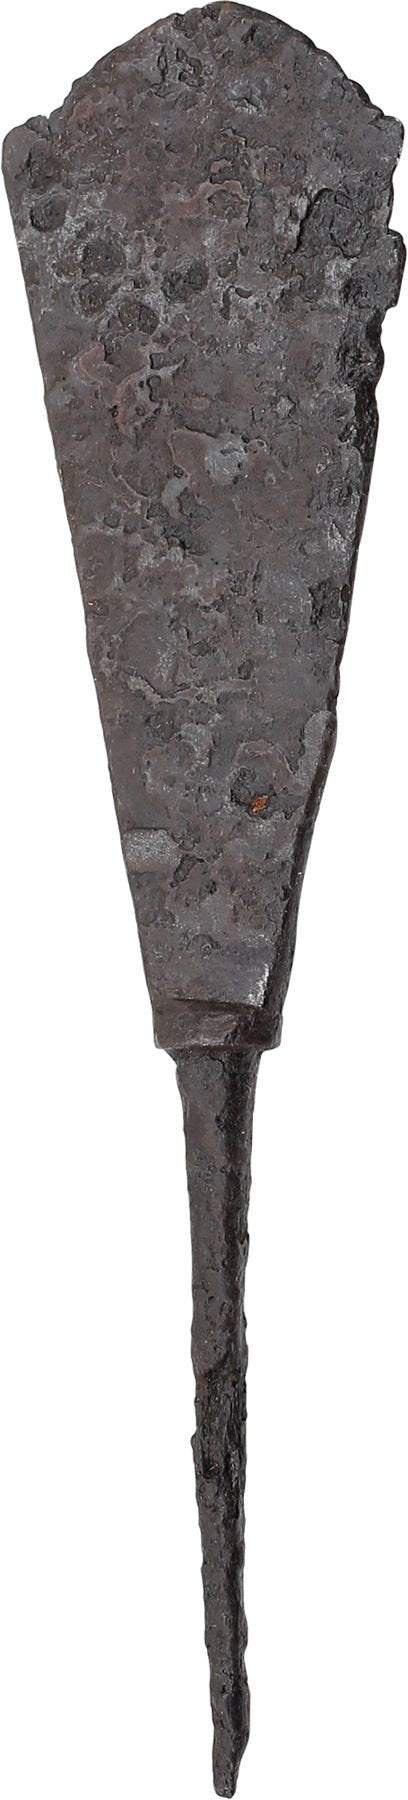 CHINESE ARROWHEAD - WAS $235.00, NOW $164.50 - Fagan Arms